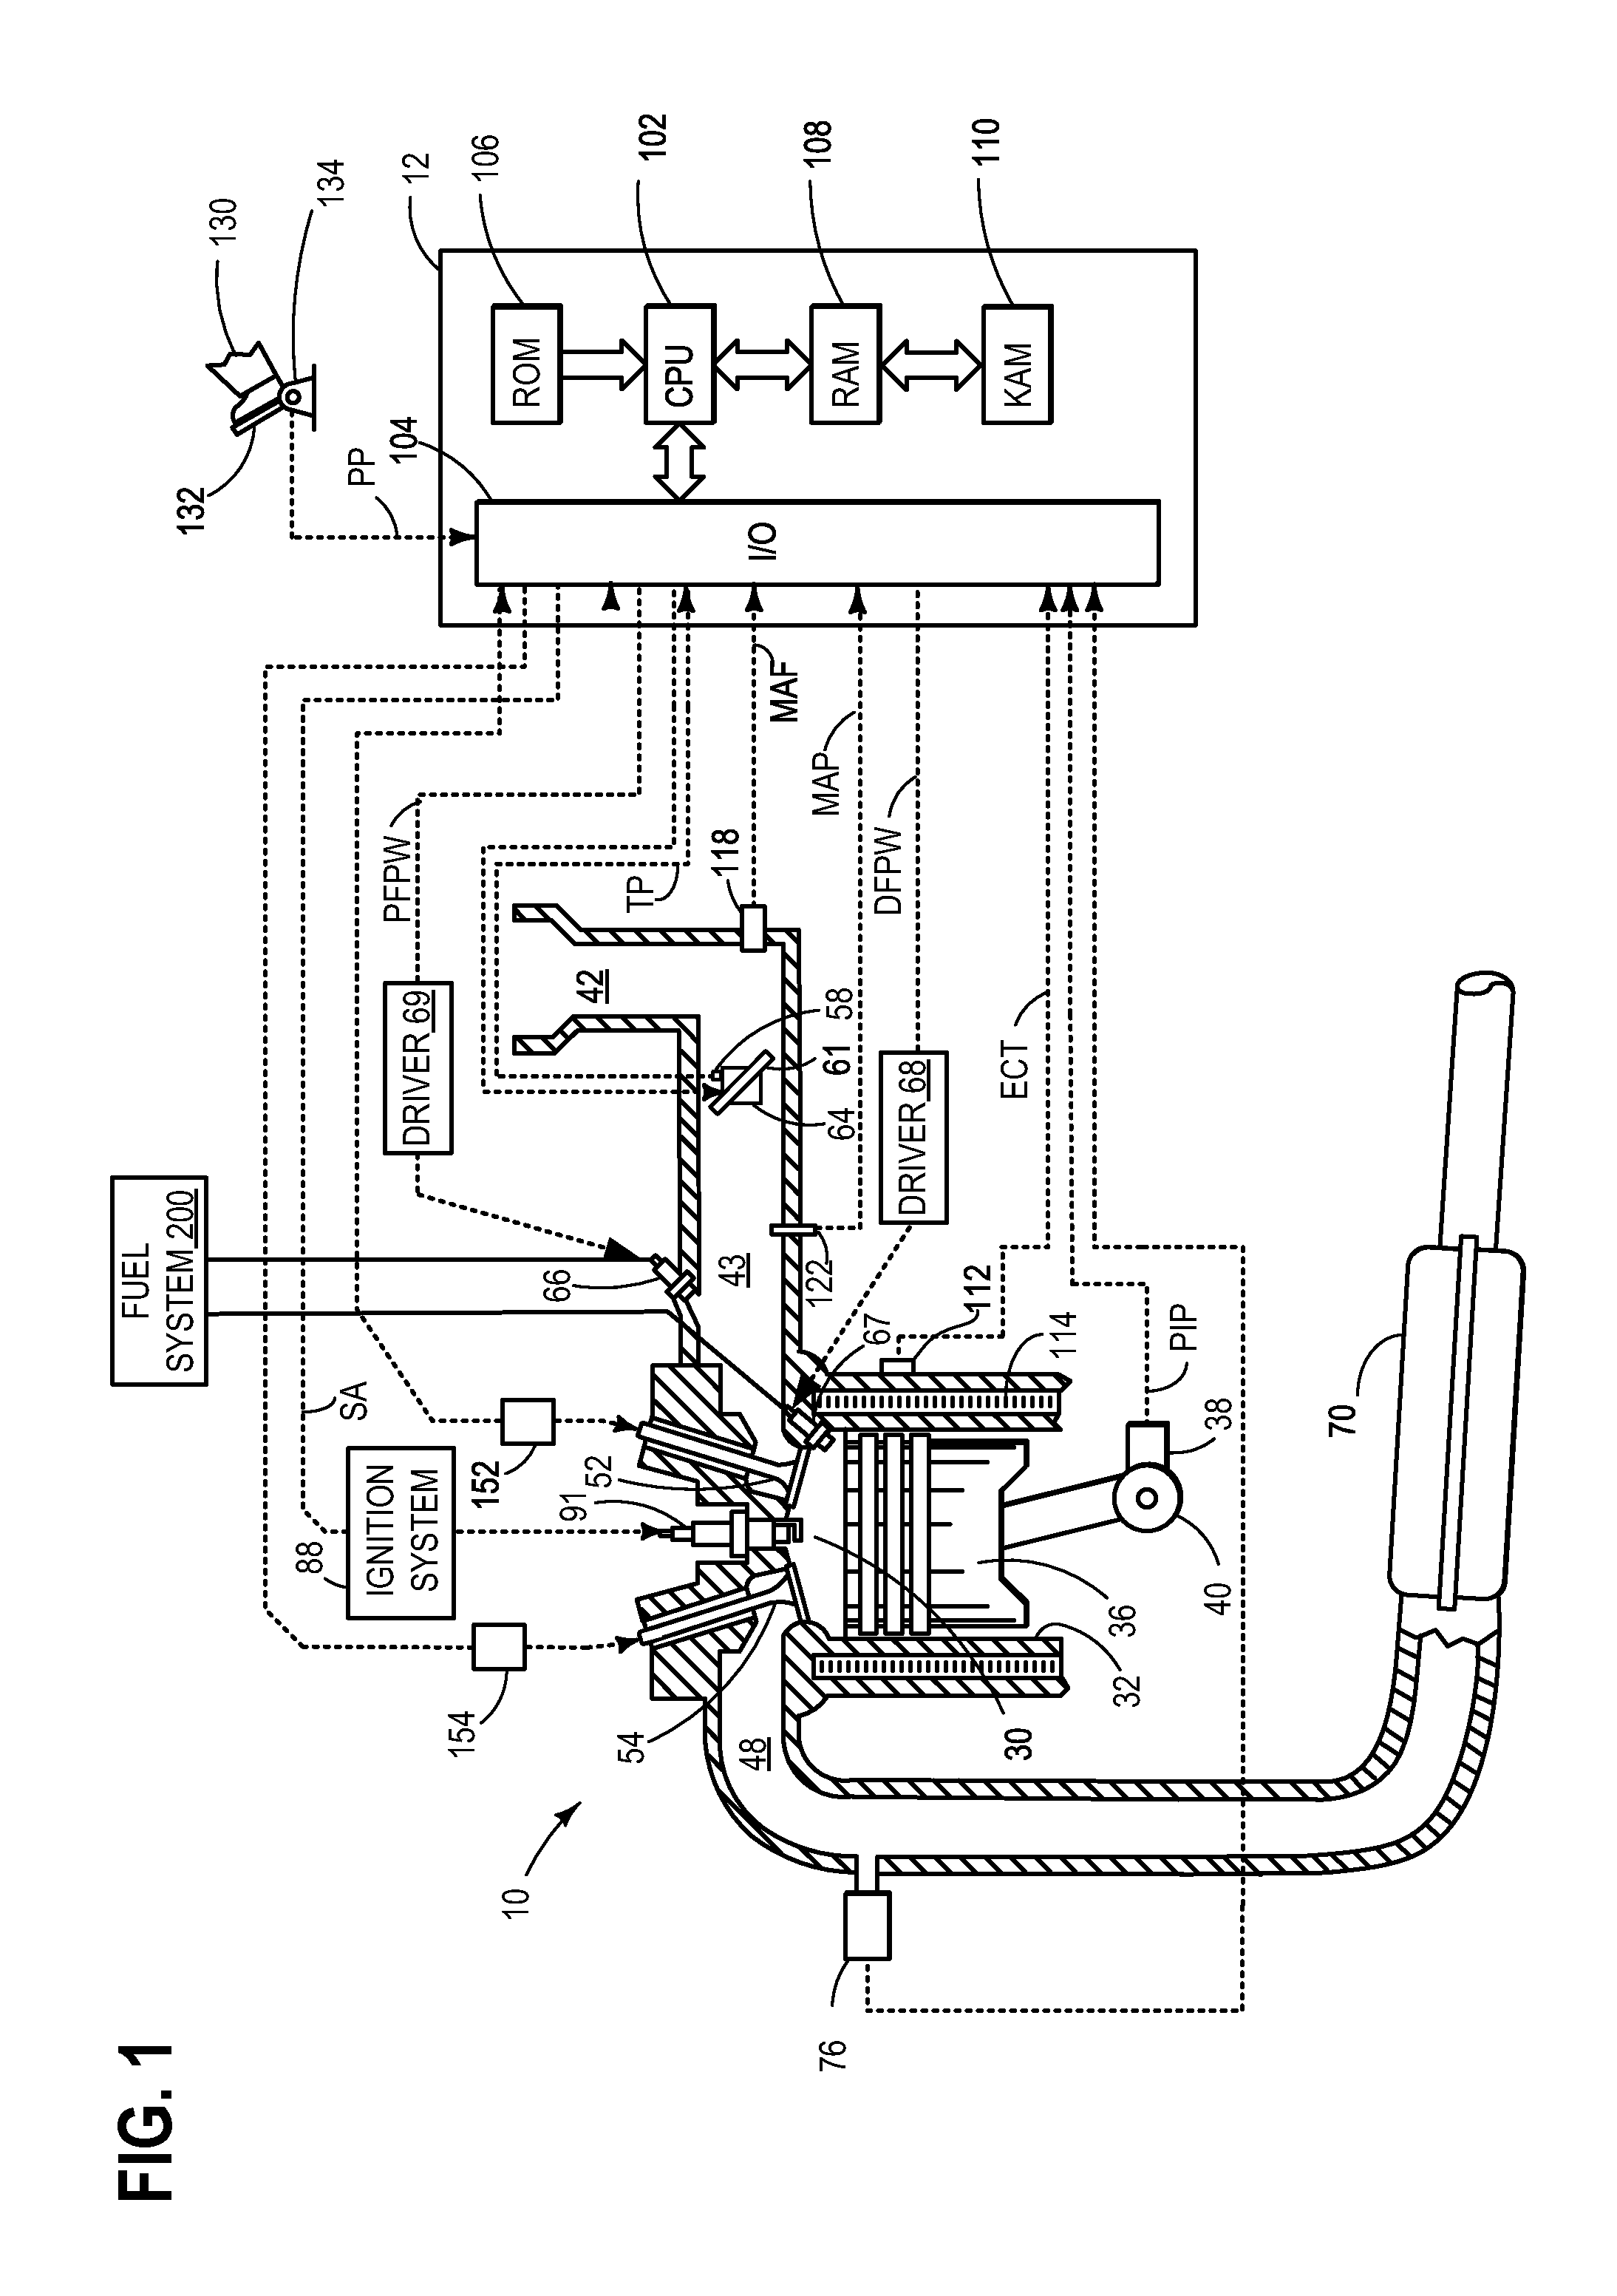 Method and system for characterizing a port fuel injector